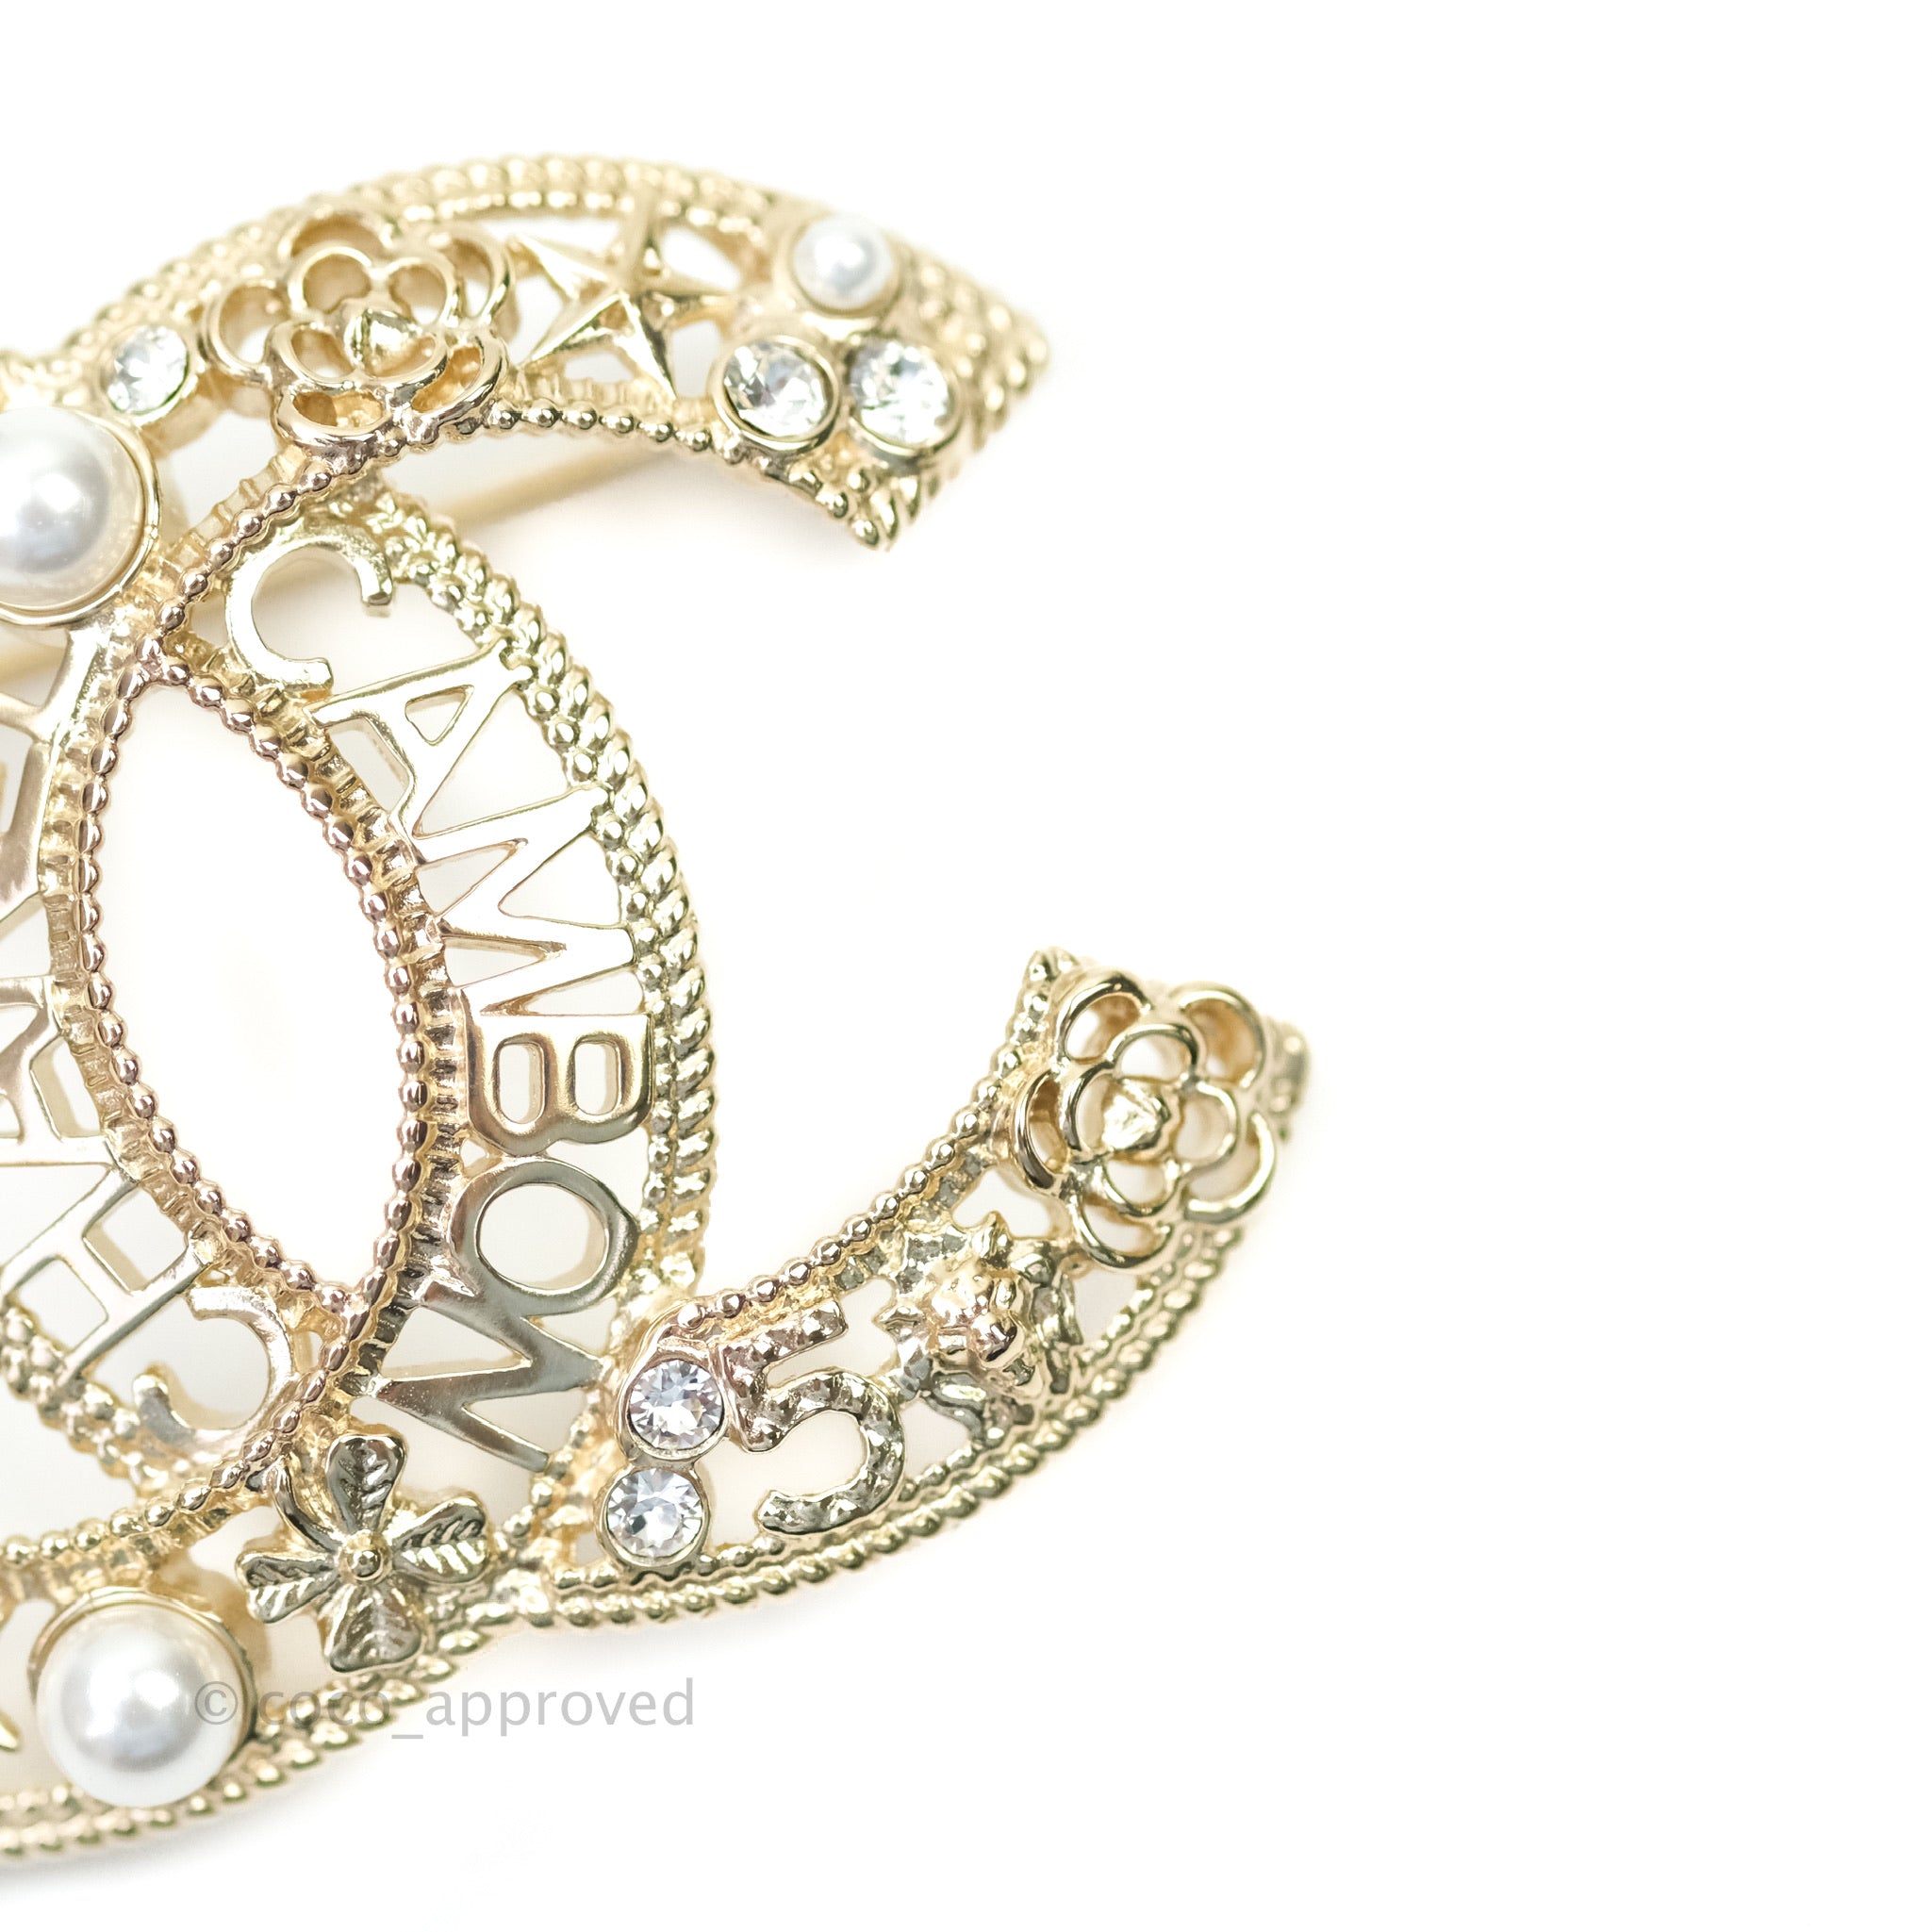 CHANEL CHANEL Brooch pin B23V Gold Plated artificial pearls Used COCO  B23V｜Product Code：2104102195126｜BRAND OFF Online Store